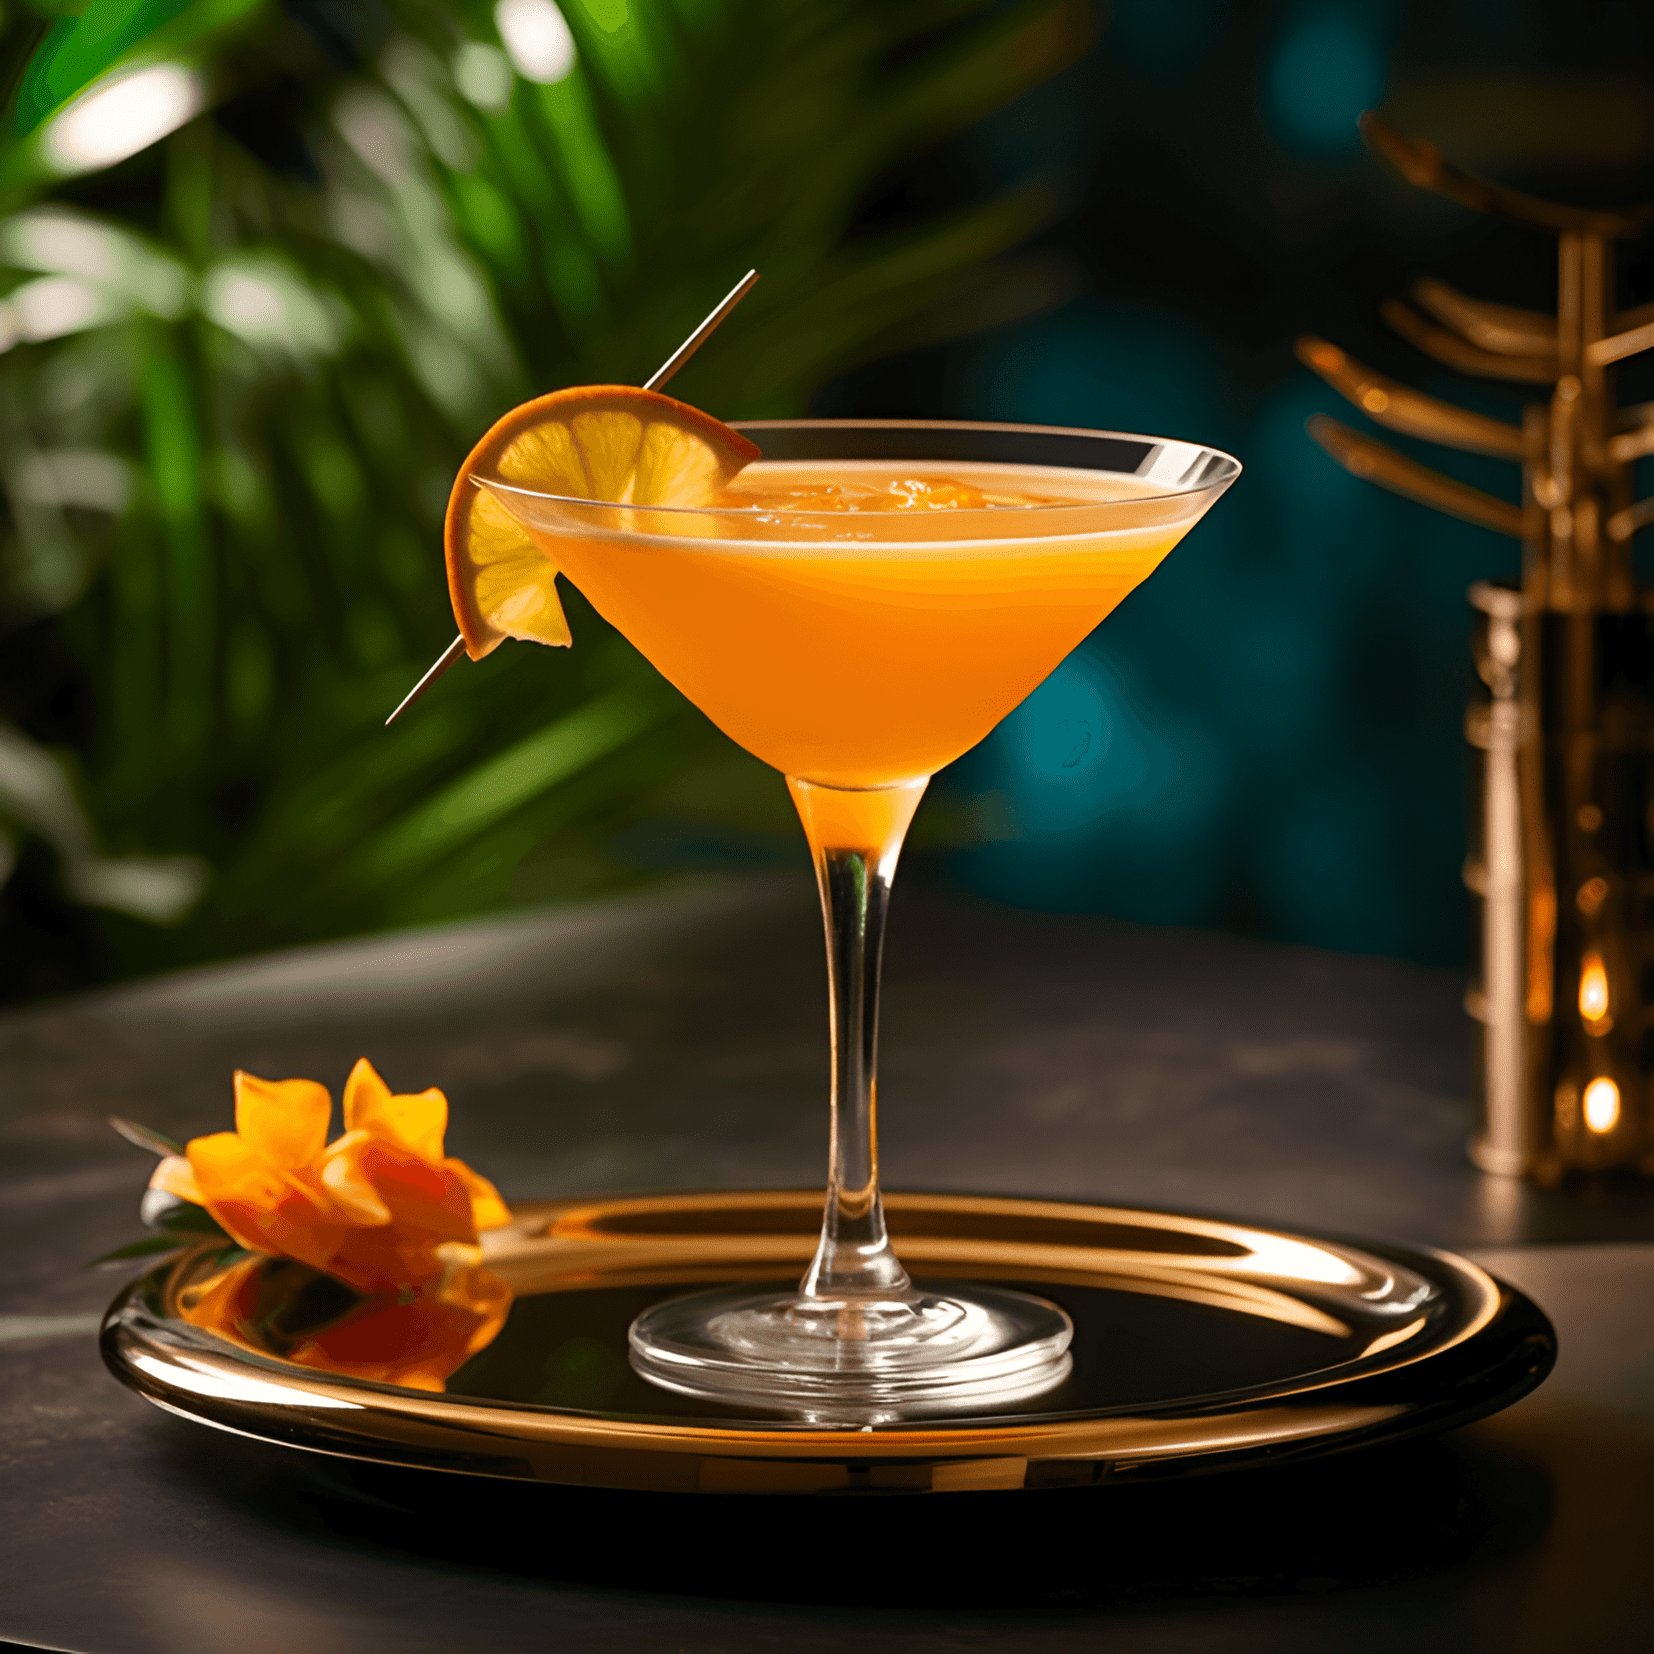 The Paradise cocktail has a delicate balance of sweet, sour, and fruity flavors. The gin provides a strong, herbal base, while the apricot brandy adds a touch of sweetness. The fresh orange and lemon juices bring a bright, citrusy tang to the drink, making it light and refreshing.